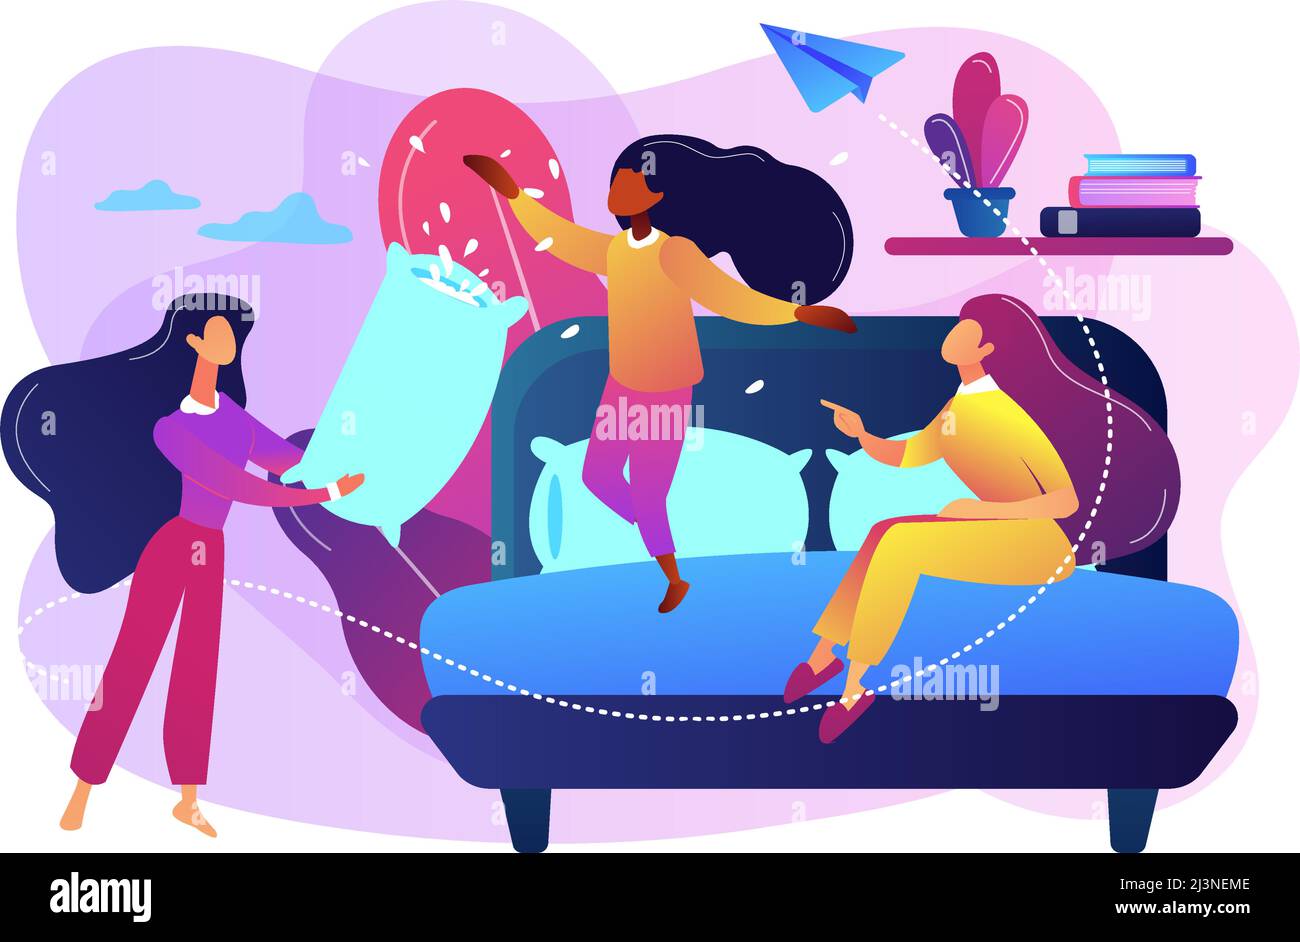 Happy tiny people female teens pillow fight in bedroom at slumber party. Pajama party, friends sleepover, slumber night party concept. Bright vibrant Stock Vector